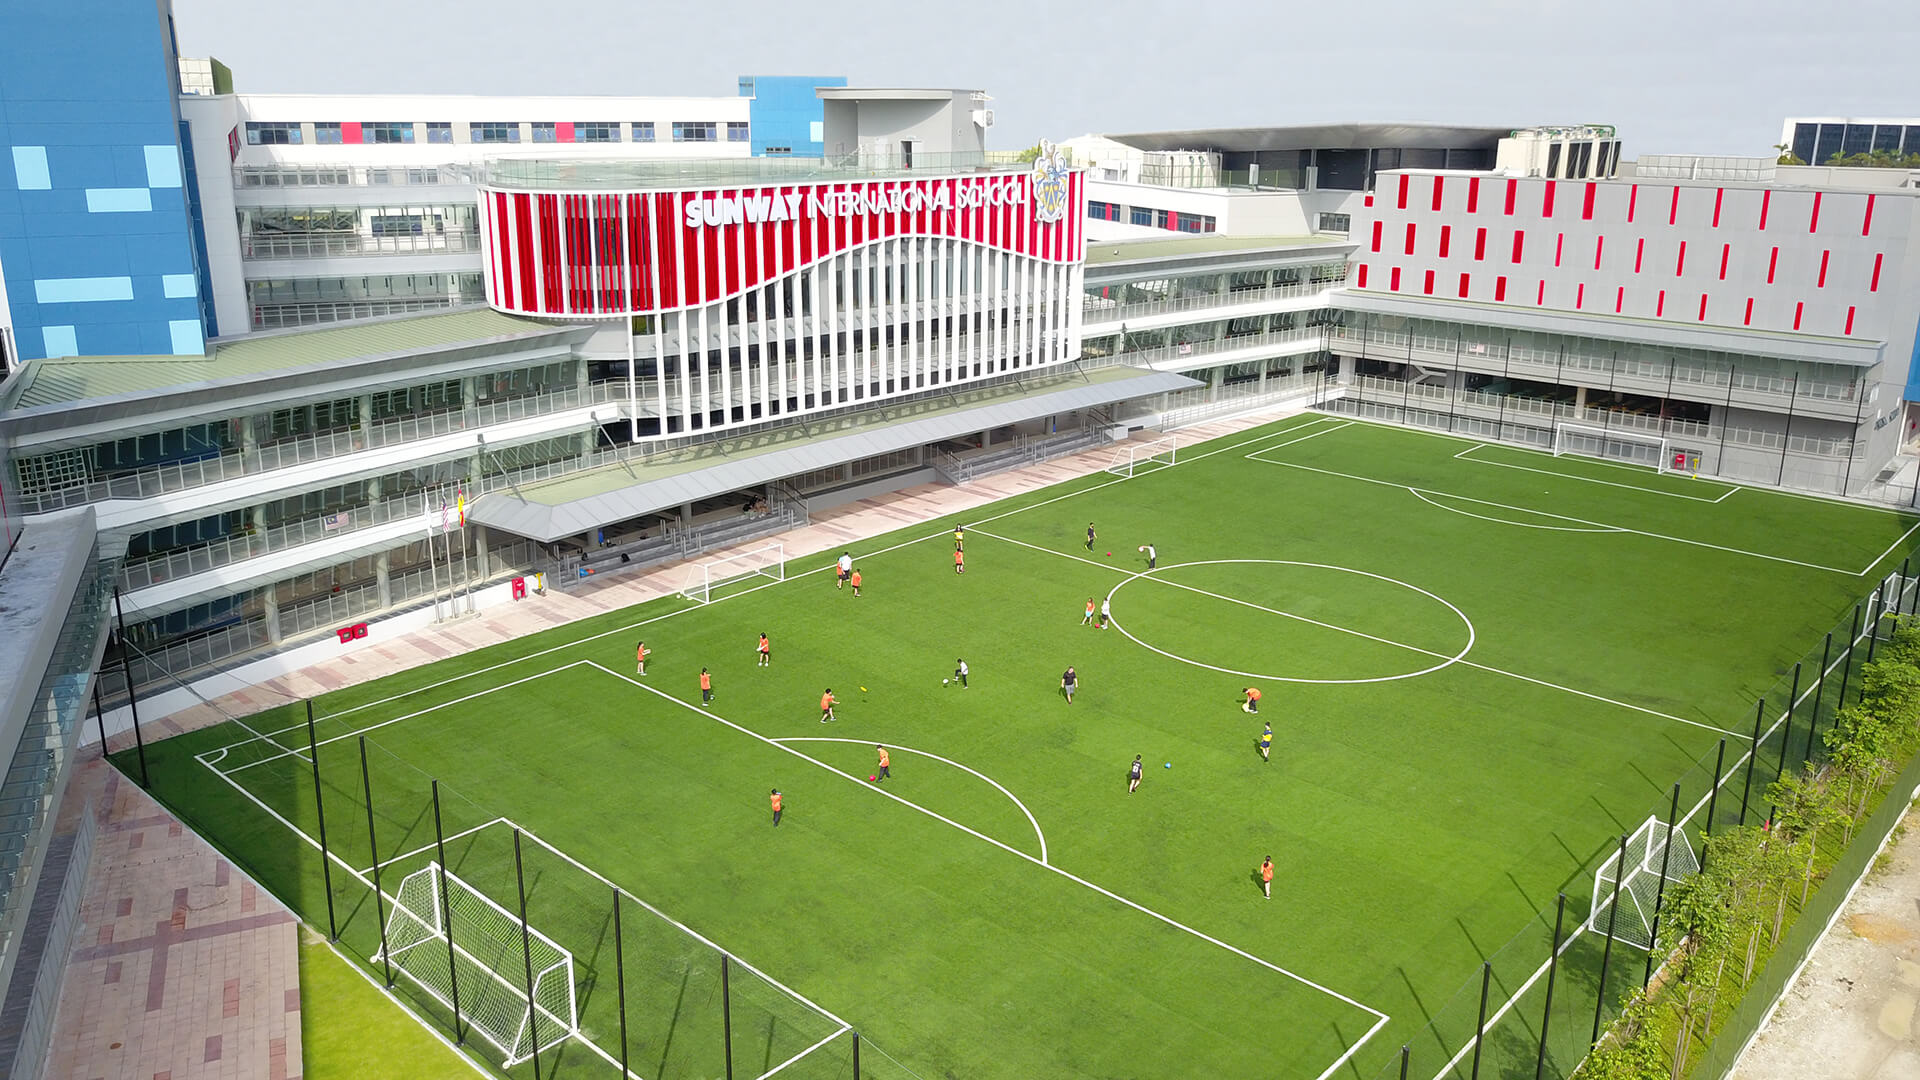 a FIFA Certified Football Turf field, the ultimate spot for some epic matches